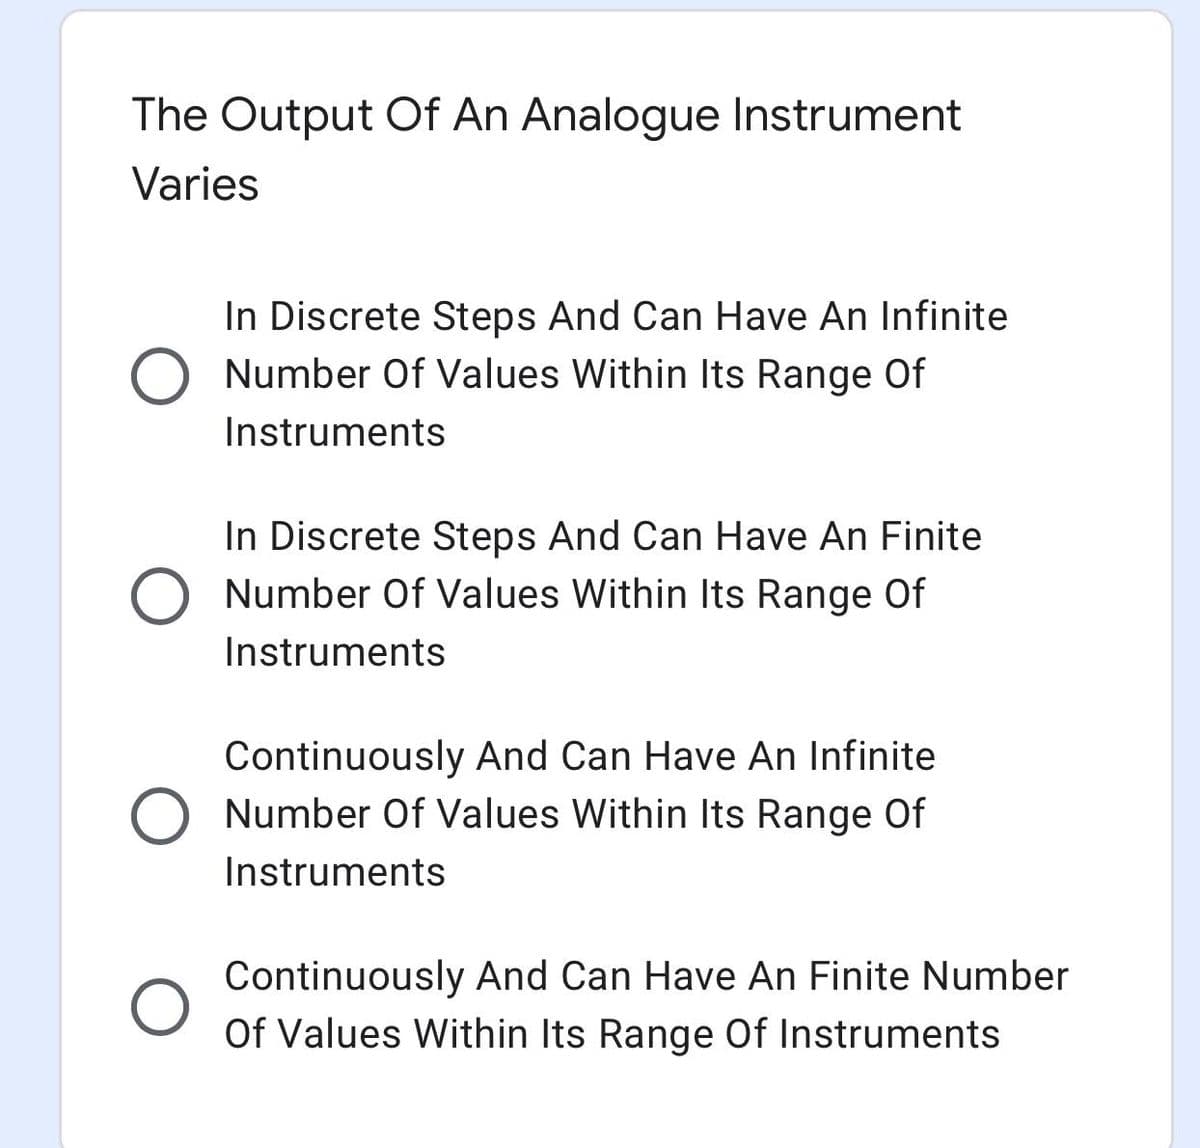 The Output Of An Analogue Instrument
Varies
In Discrete Steps And Can Have An Infinite
O Number Of Values Within Its Range Of
Instruments
In Discrete Steps And Can Have An Finite
Number Of Values Within Its Range Of
Instruments
Continuously And Can Have An Infinite
Number Of Values Within Its Range Of
Instruments
Continuously And Can Have An Finite Number
Of Values Within Its Range Of Instruments
